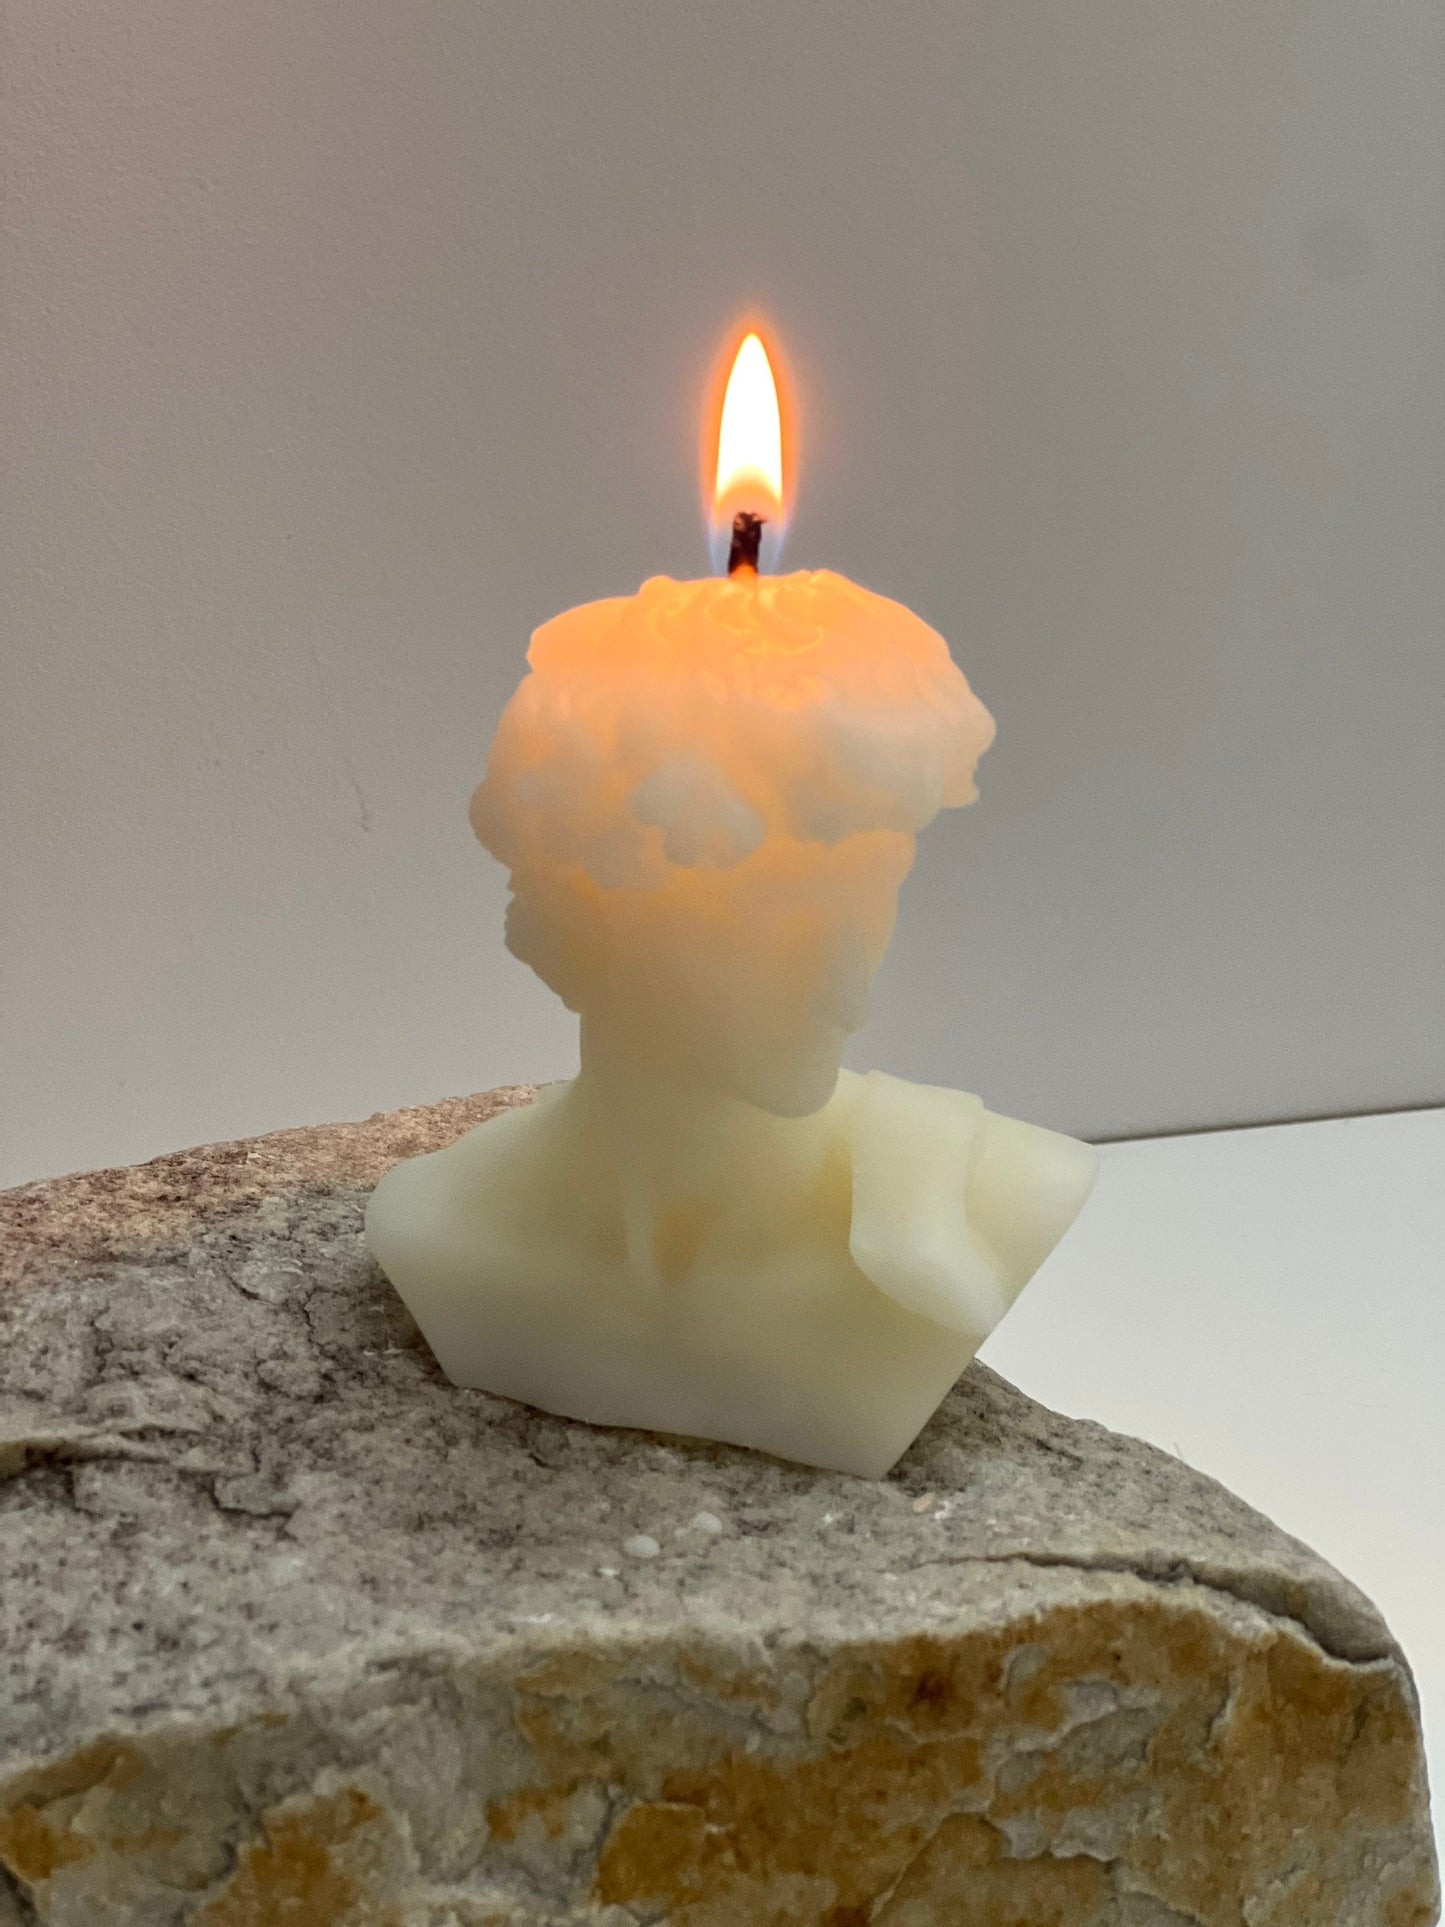 The David Candle